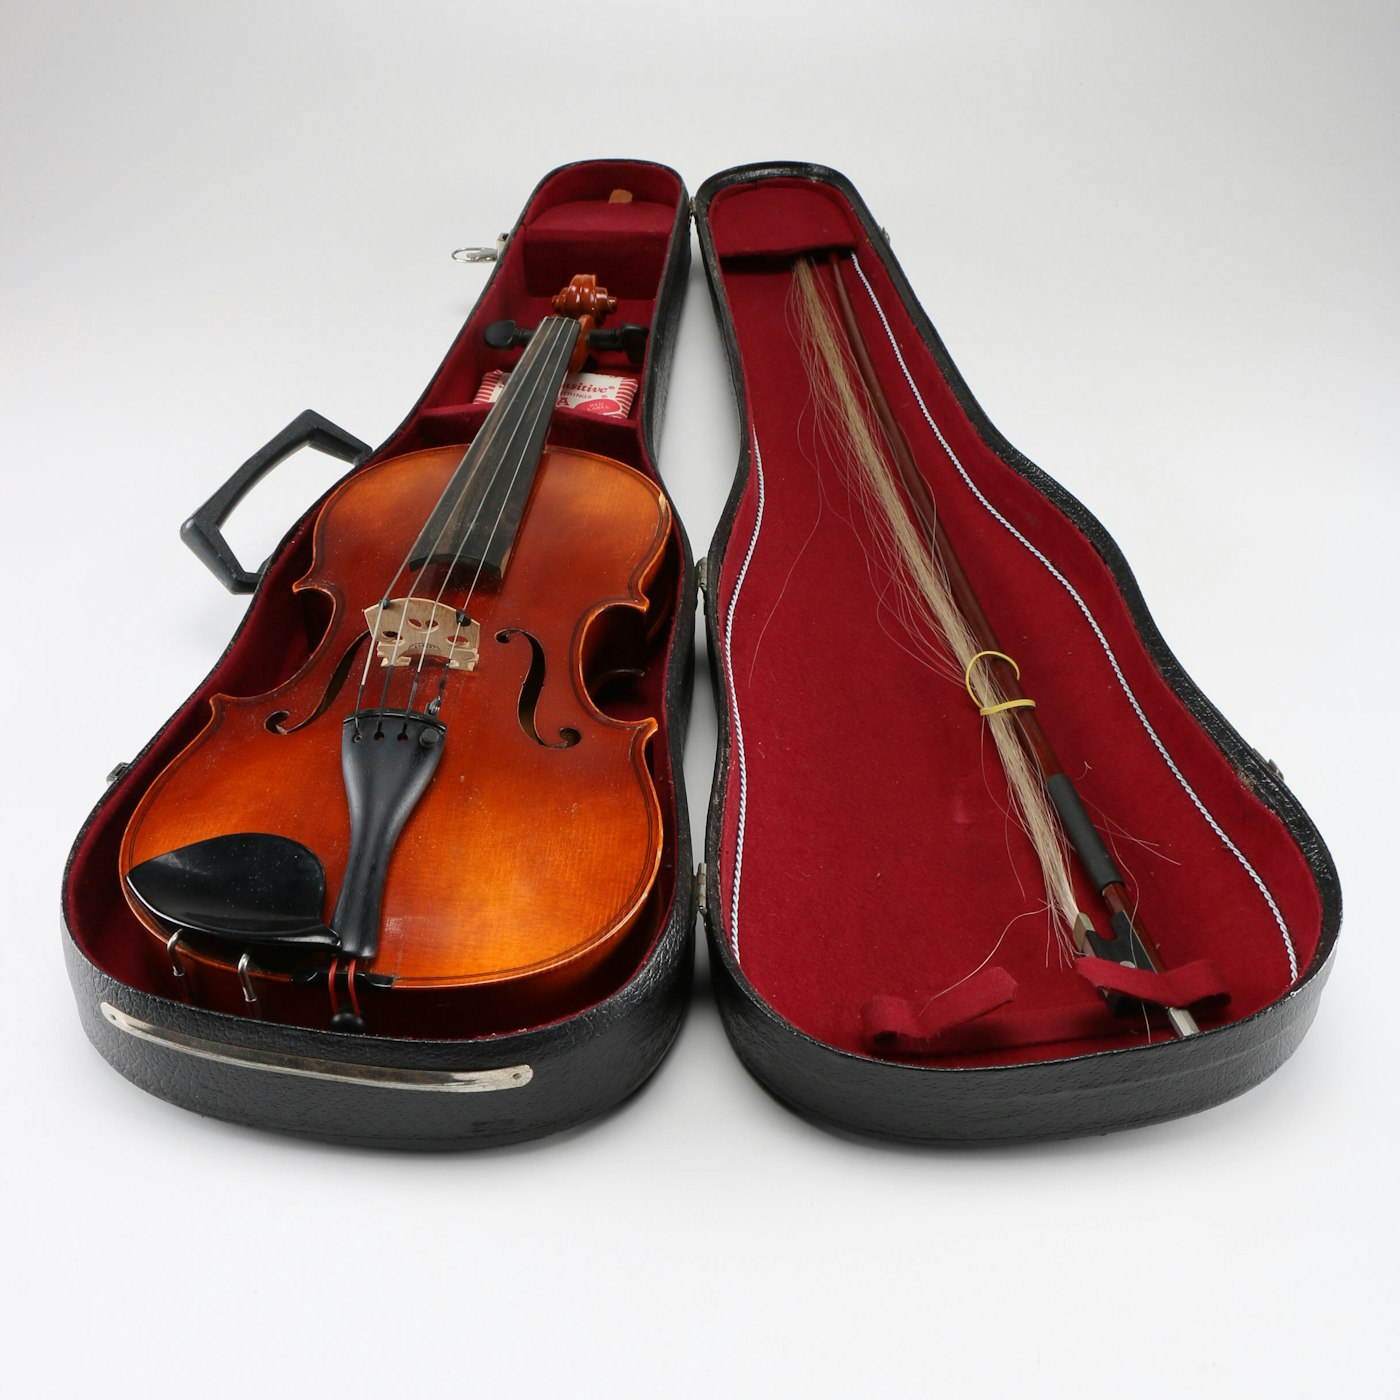 Karl knilling cello review